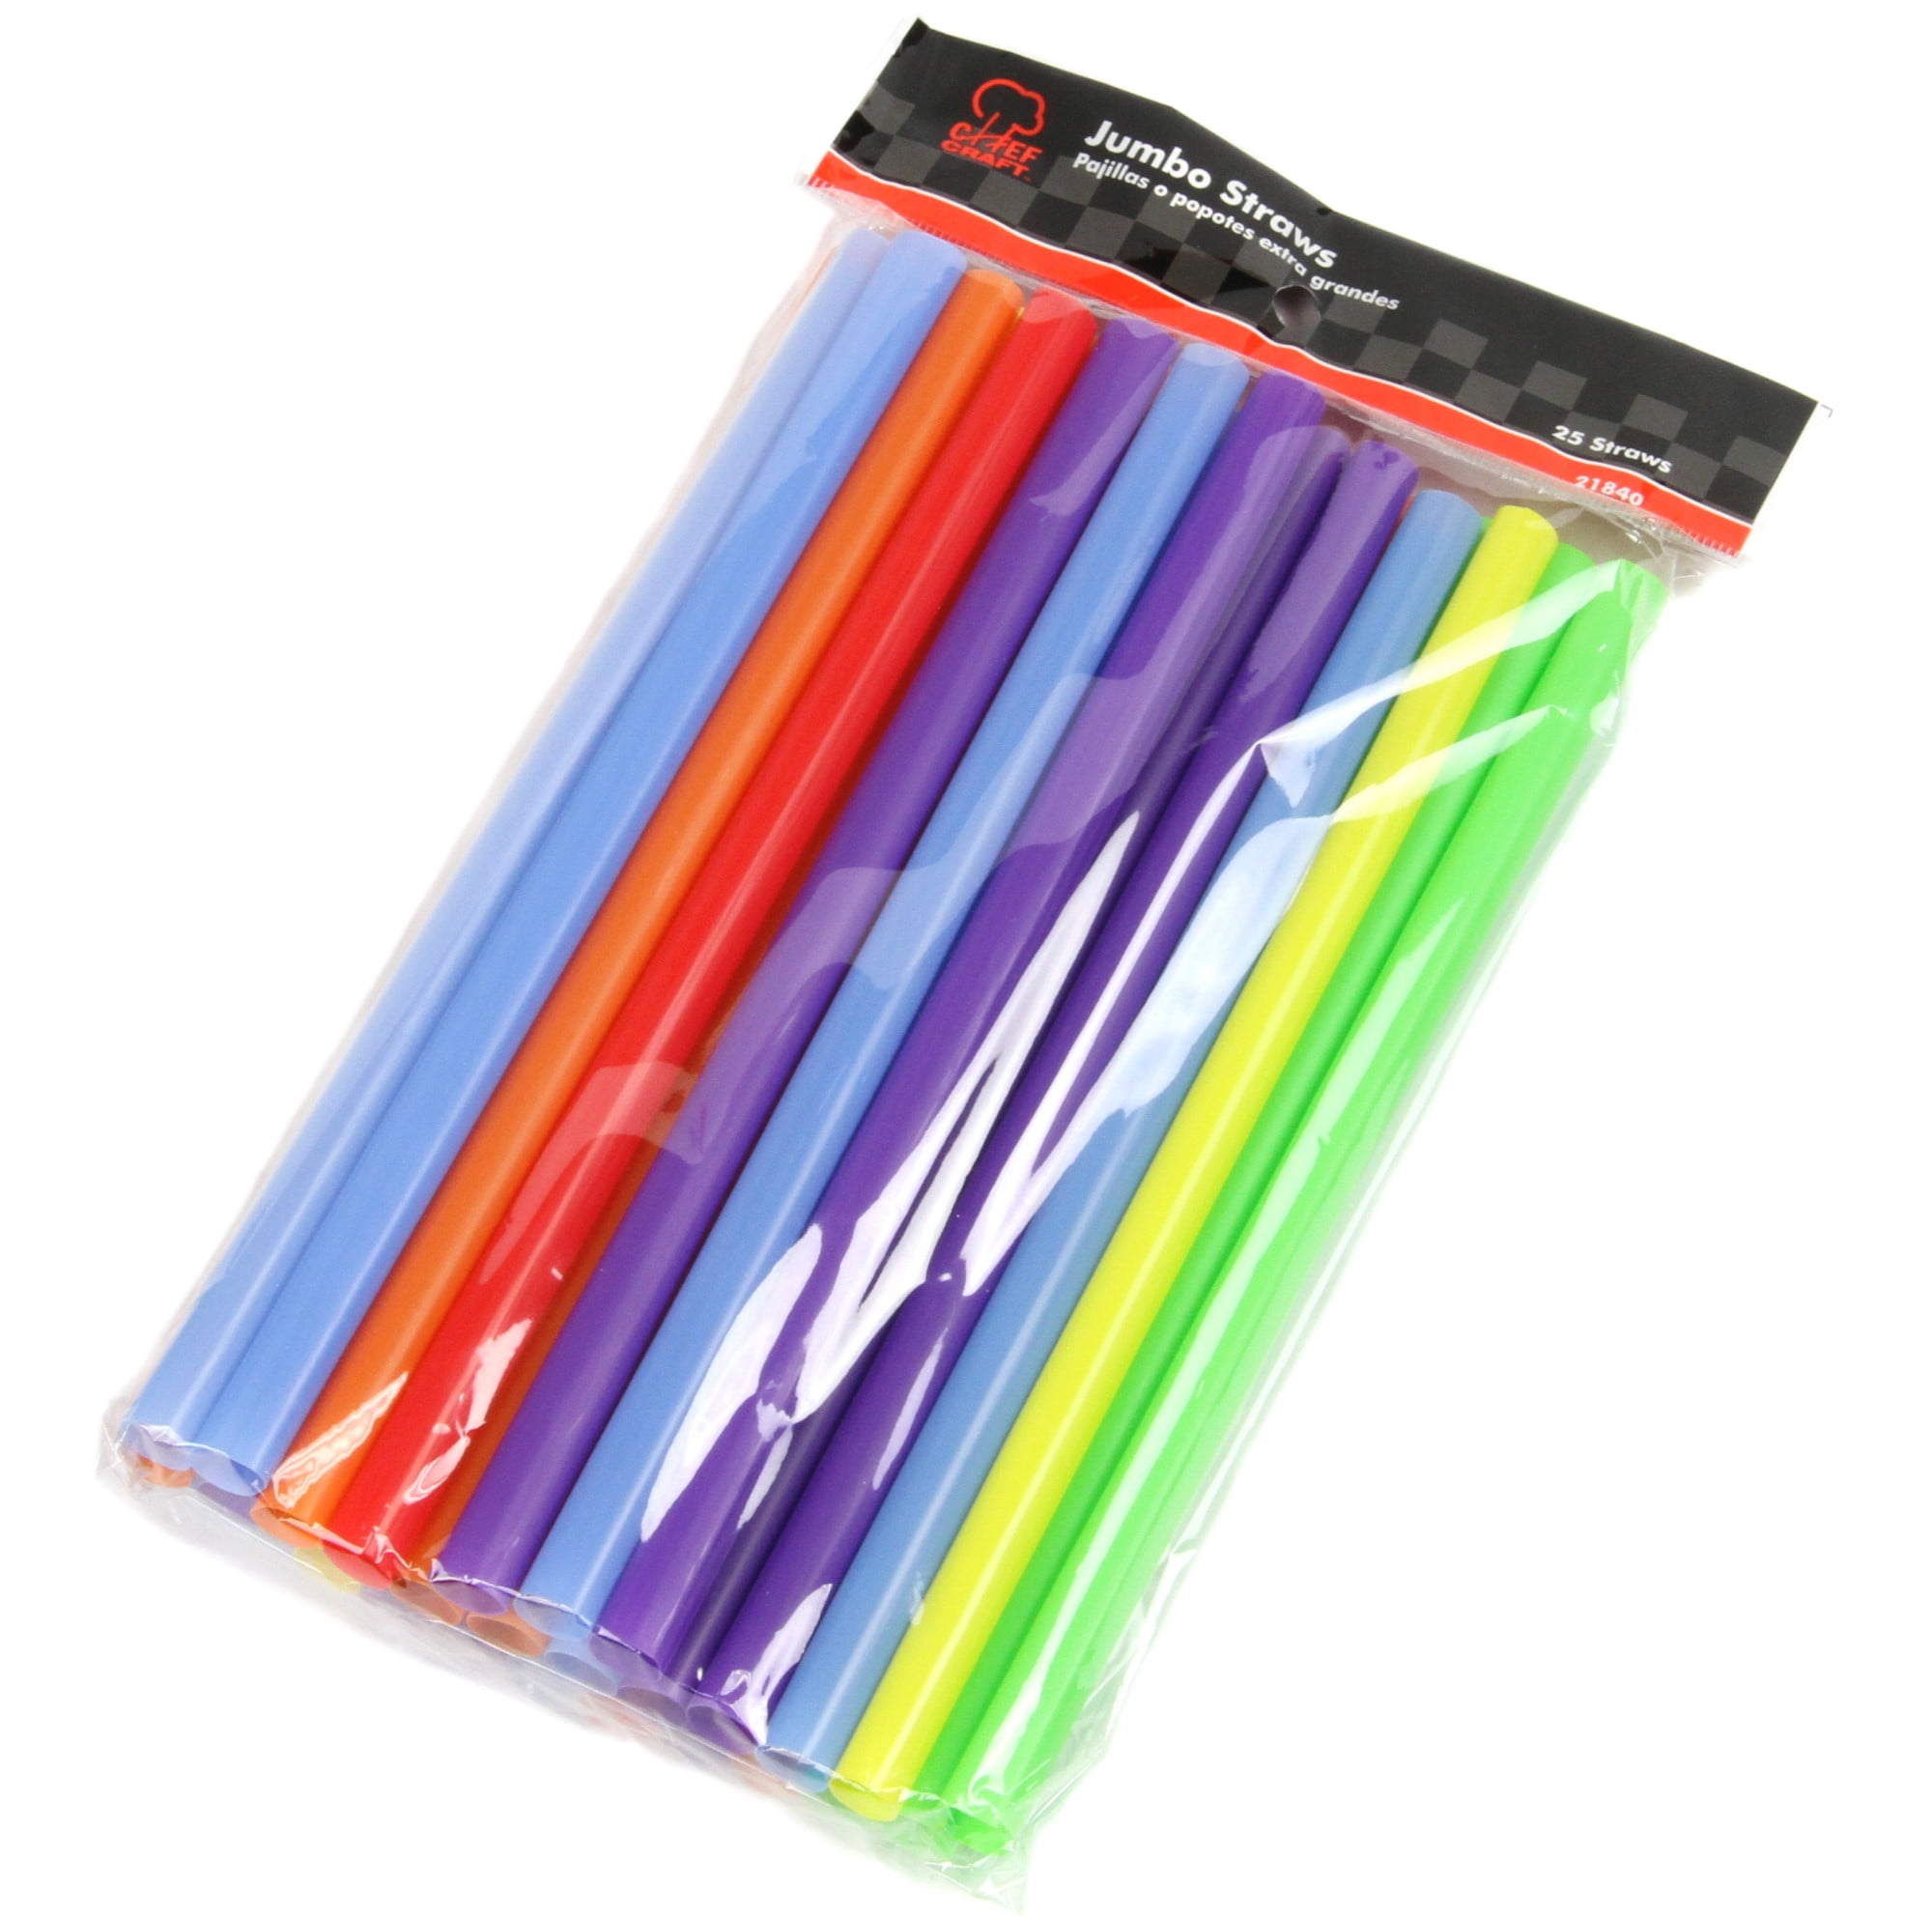 25 Pieces Reusable Plastic Straws. BPA-Free, 9 Inch Long Drinking